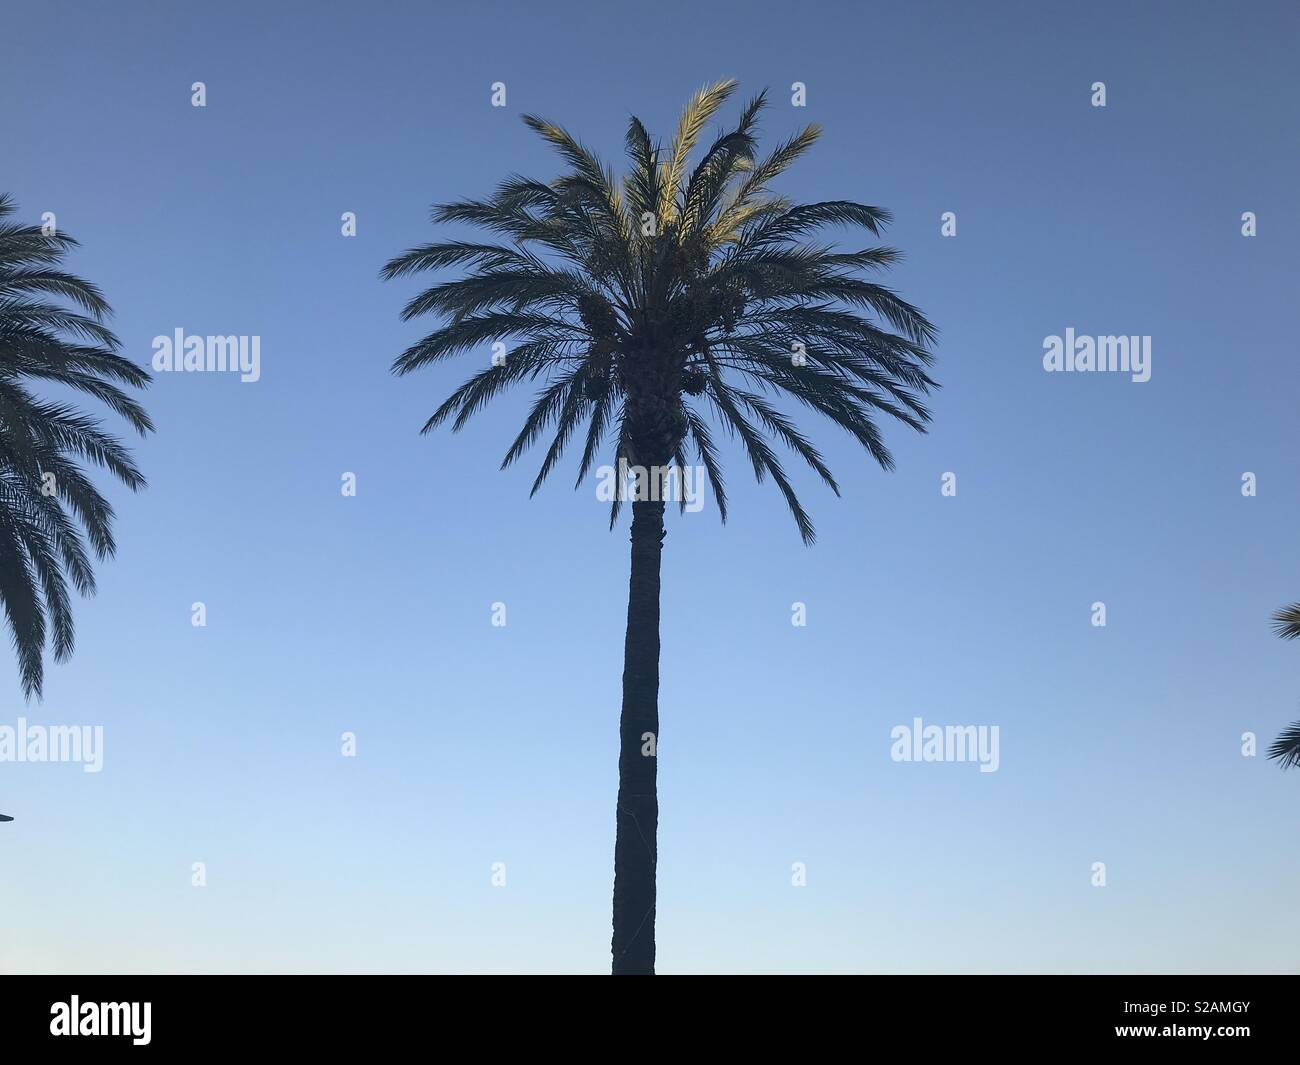 Summer bliss palm trees Stock Photo - Alamy